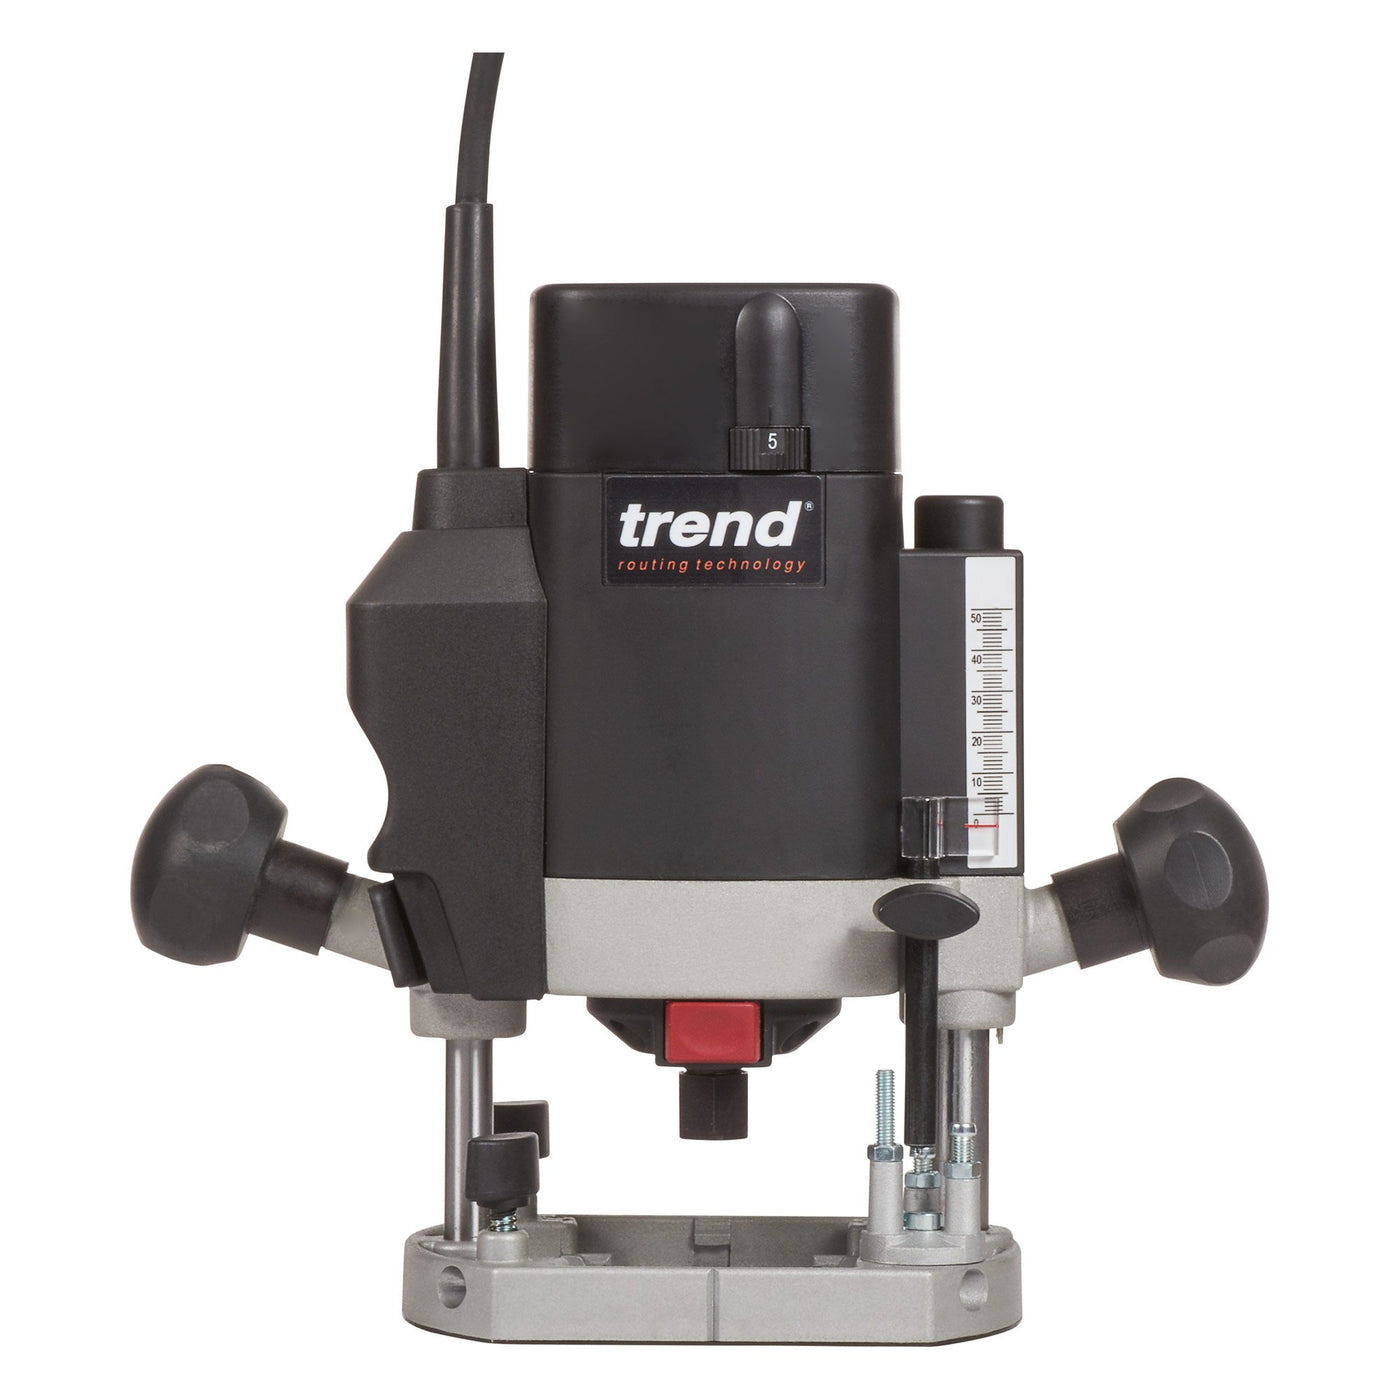 Trend 1000W 1/4" Variable Speed Router 115V